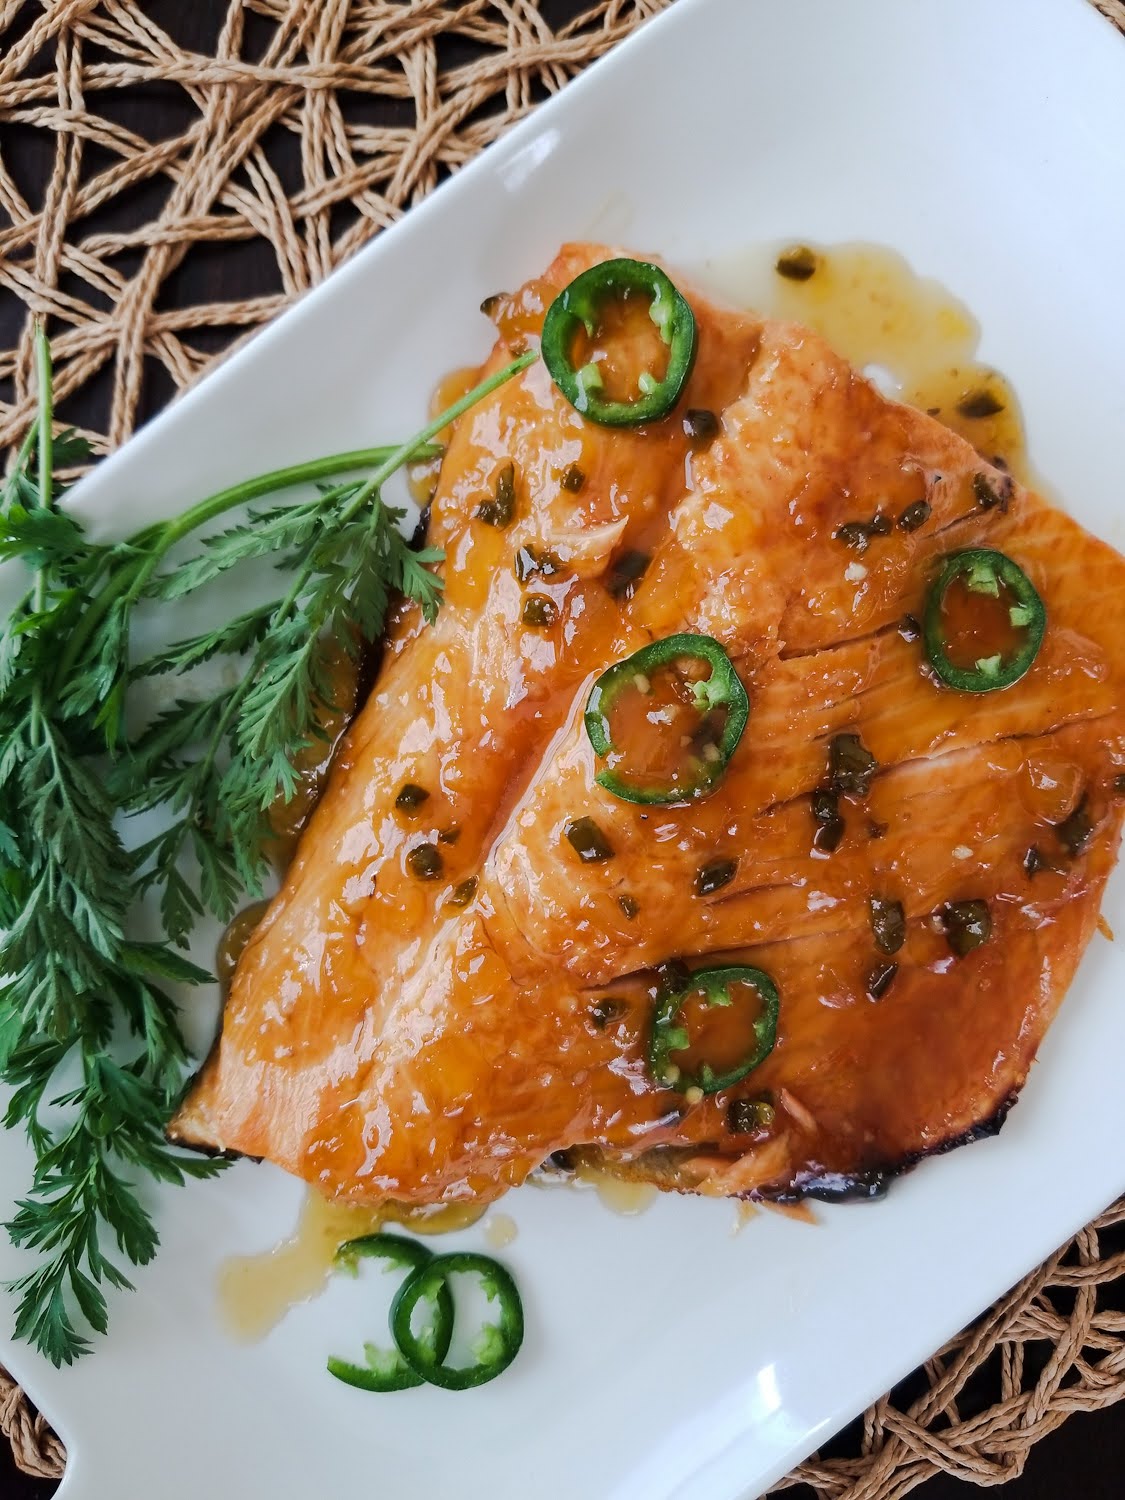 Spicy Pineapple Passion Fruit Glazed Salmon